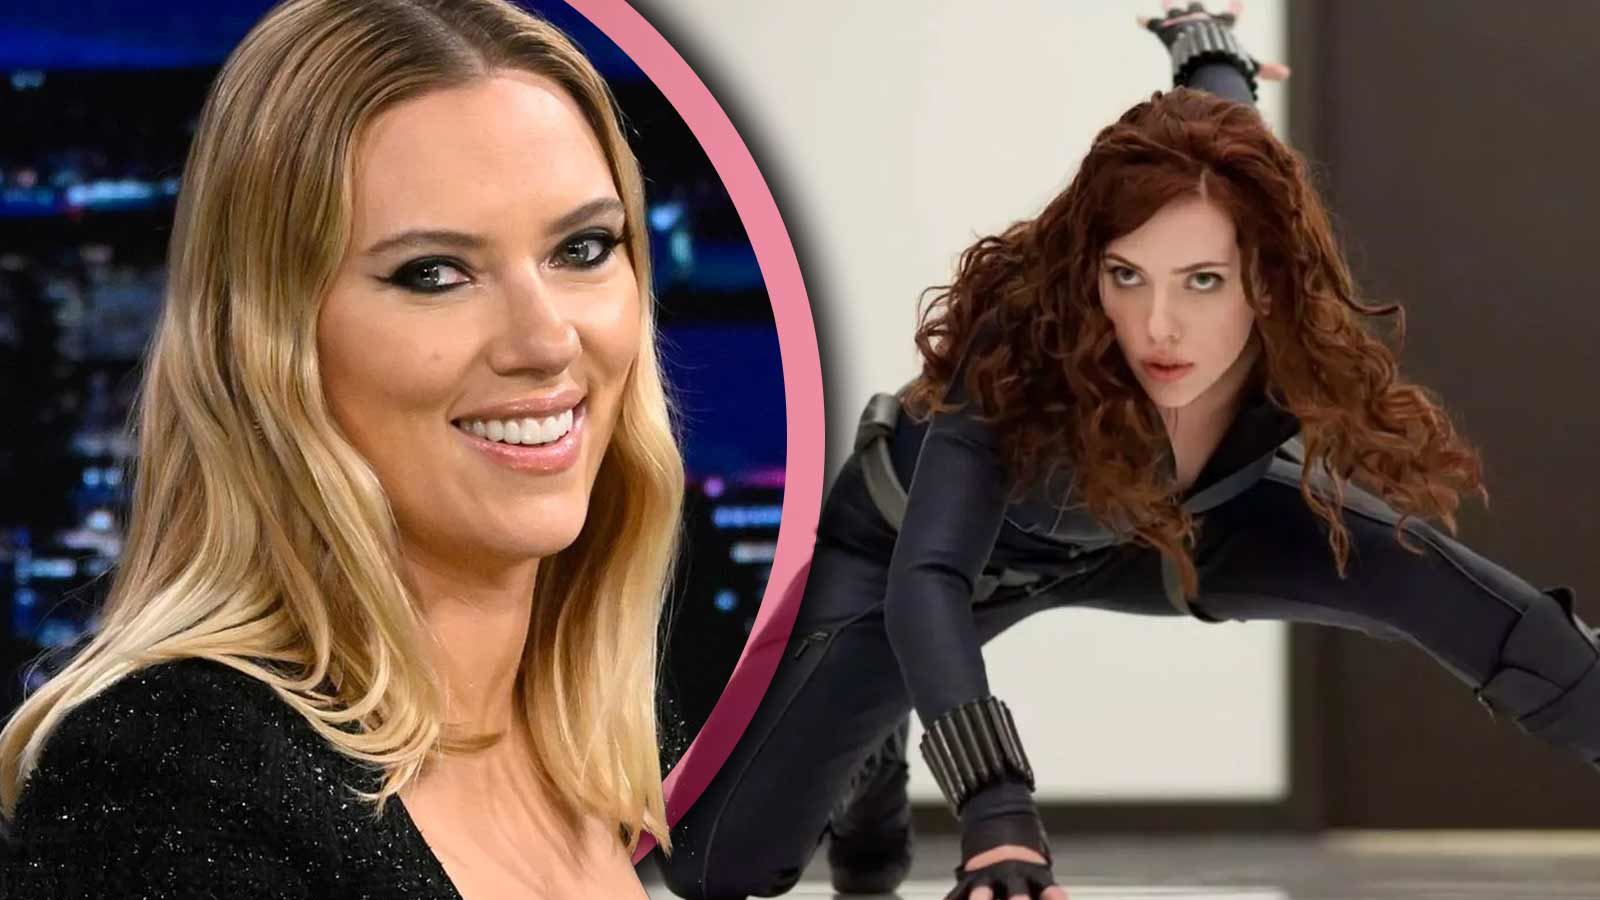 “I feel like every year it gets worse”: Scarlett Johansson is Still “terrified” of Facing One Sticky Situation in Public, Despite Her Global Fame Due to Iconic MCU Role